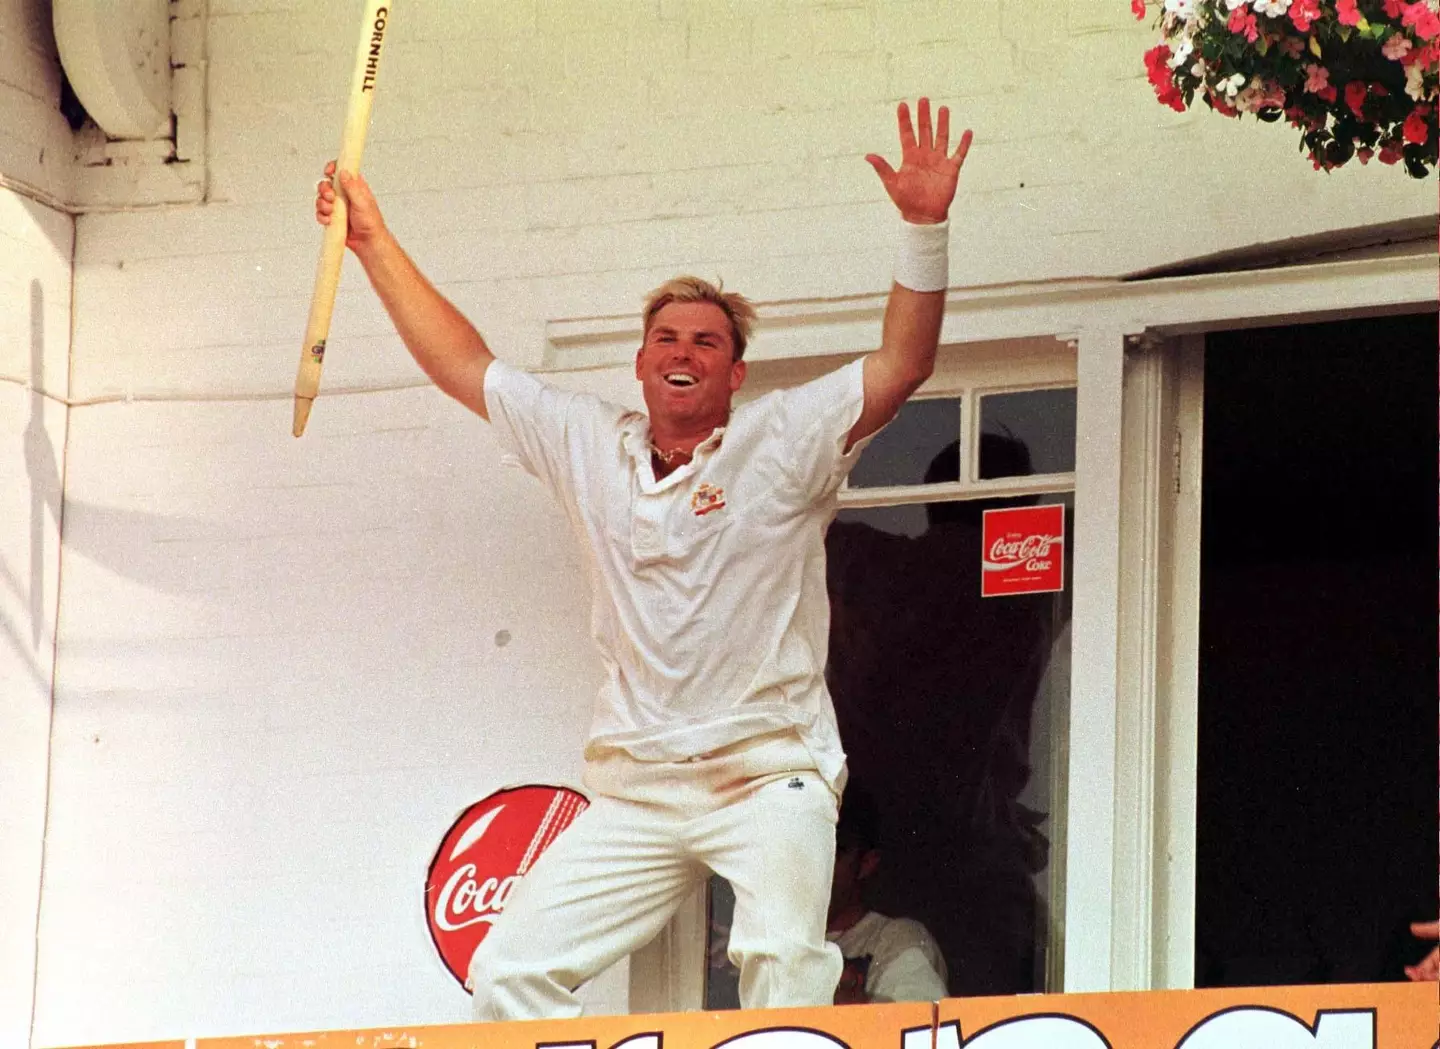 Warne was one of sports great characters. Image: PA Images